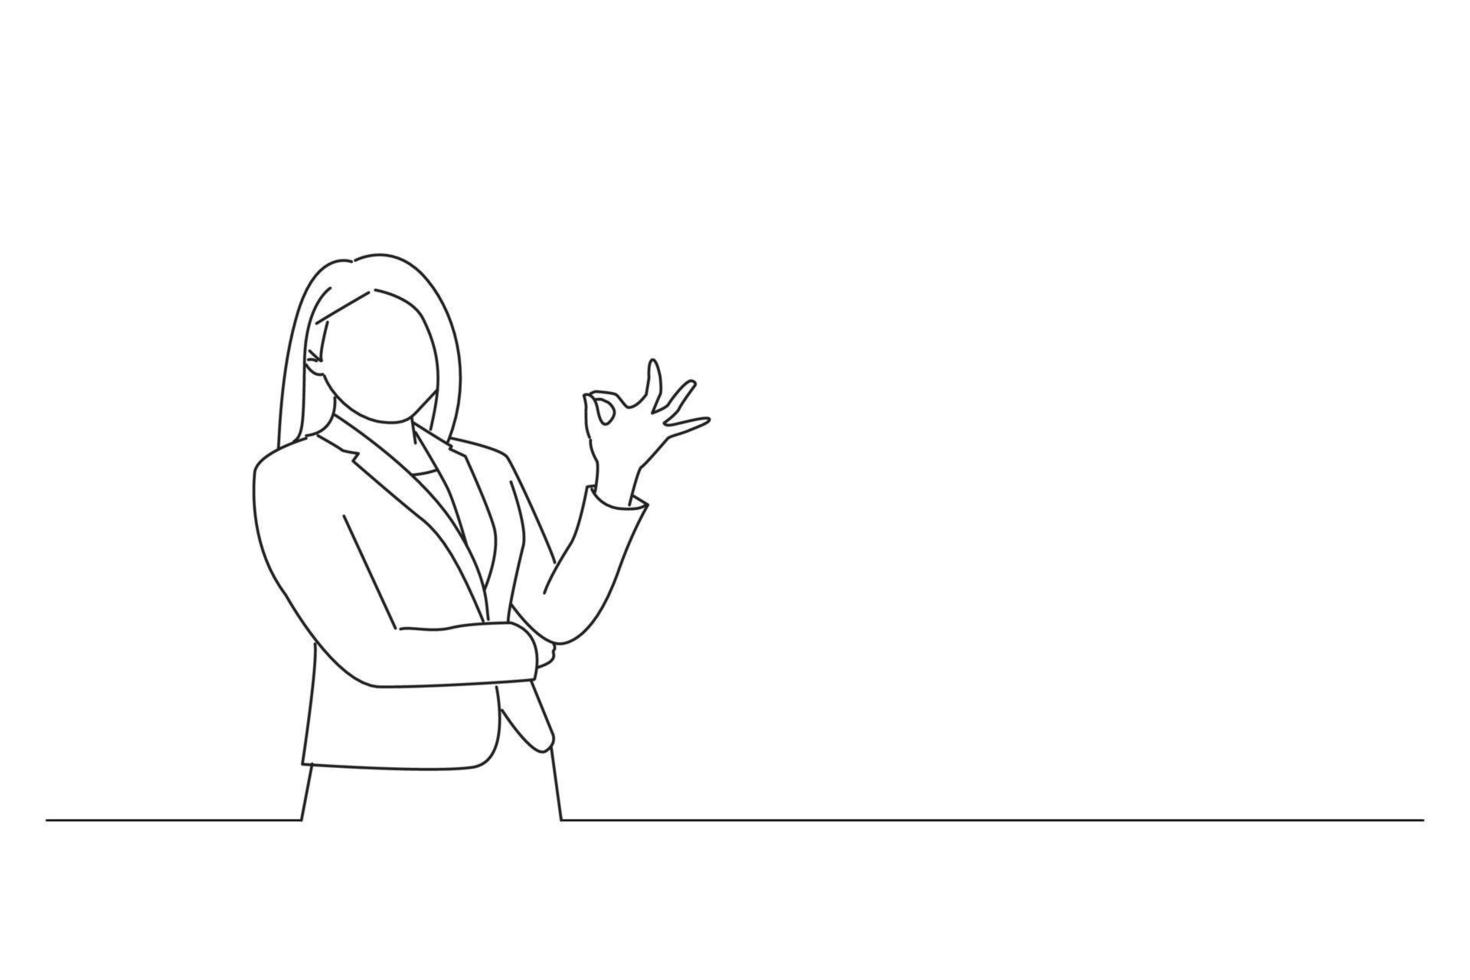 Illustration of young business woman showing OK sign. Outline drawing style art vector